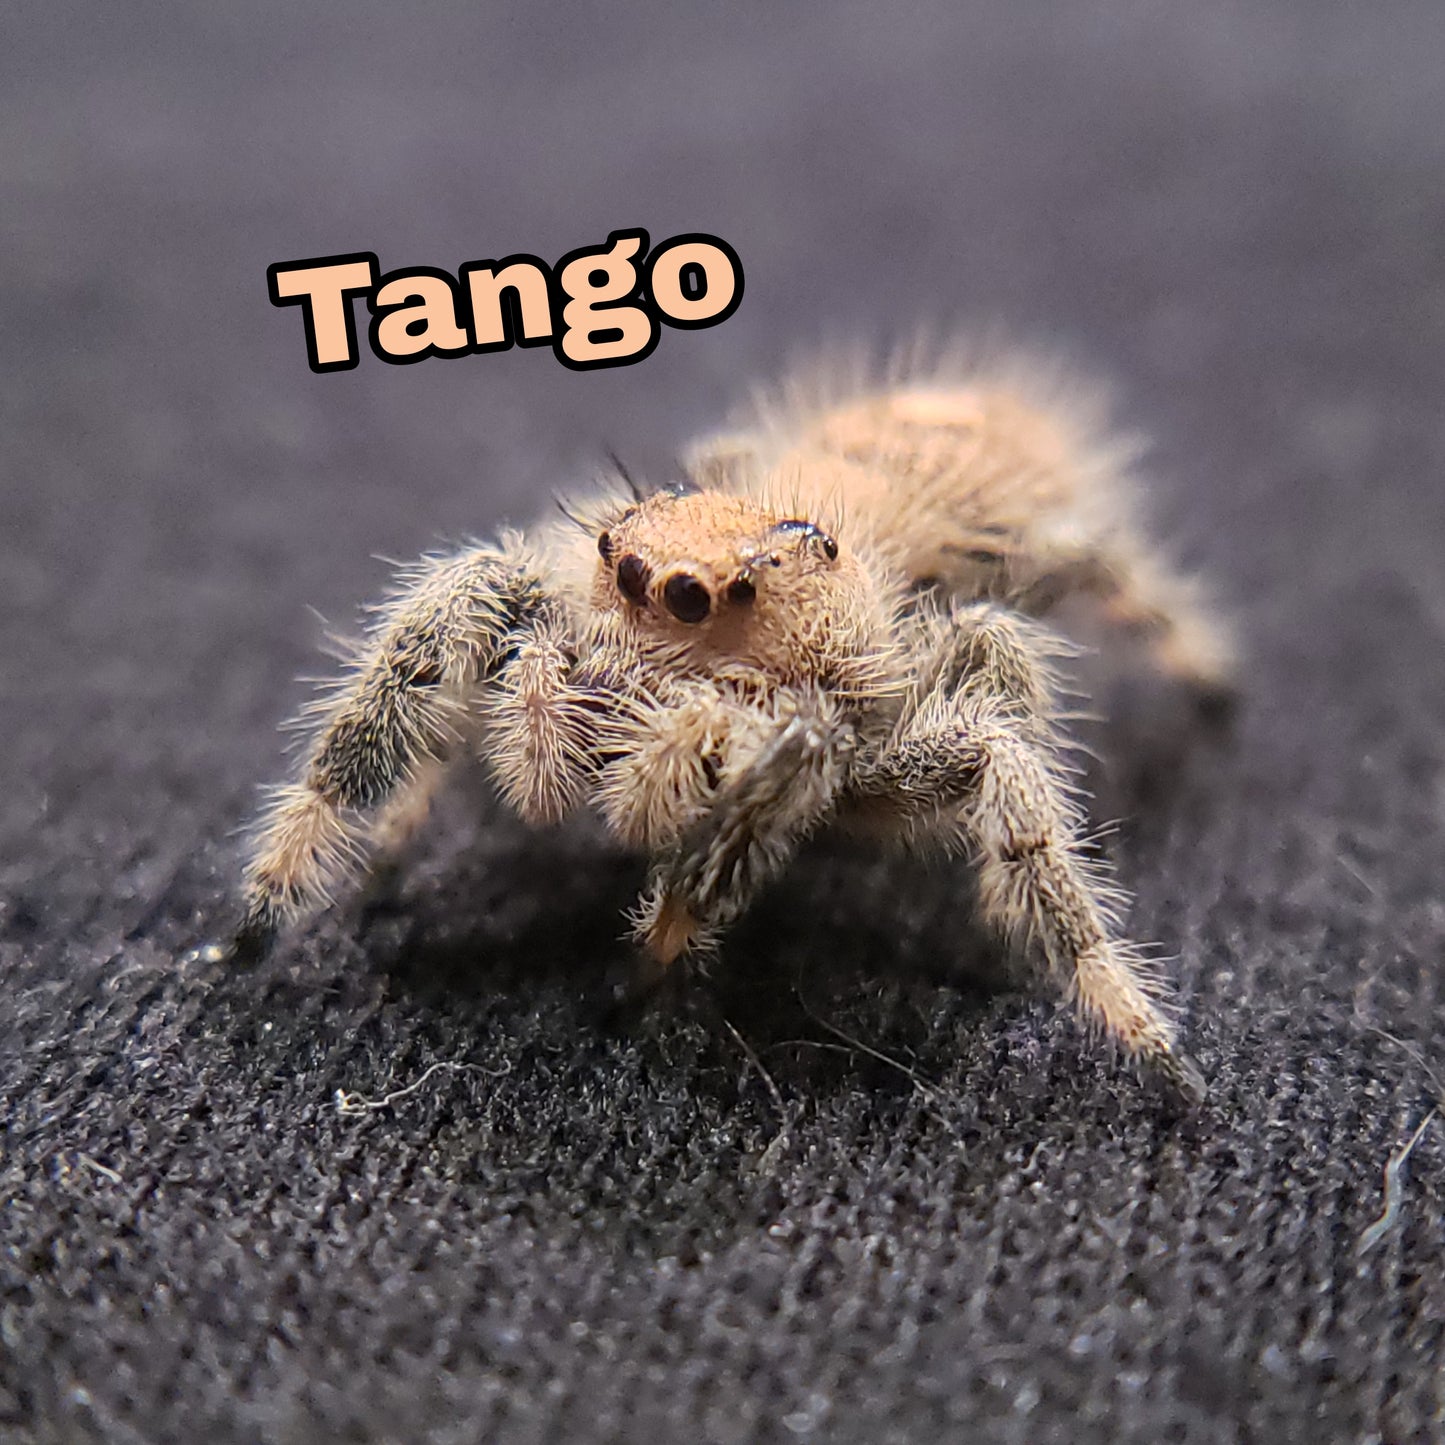 Regal Jumping Spider "Tango" - Jumping Spiders For Sale - Spiders Source - #1 Regal Jumping Spider Store